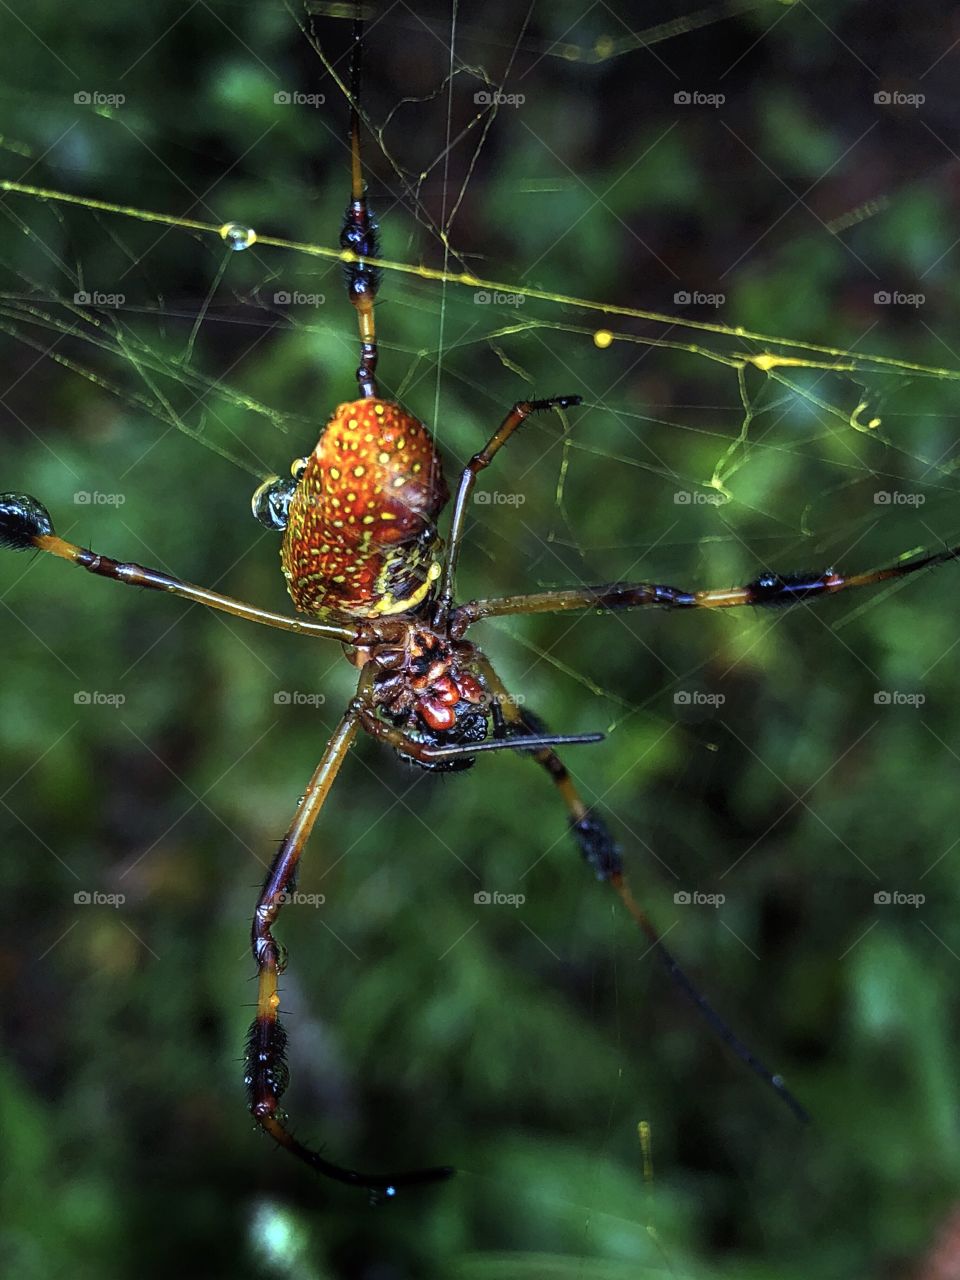 Small Banana Spider after the rain